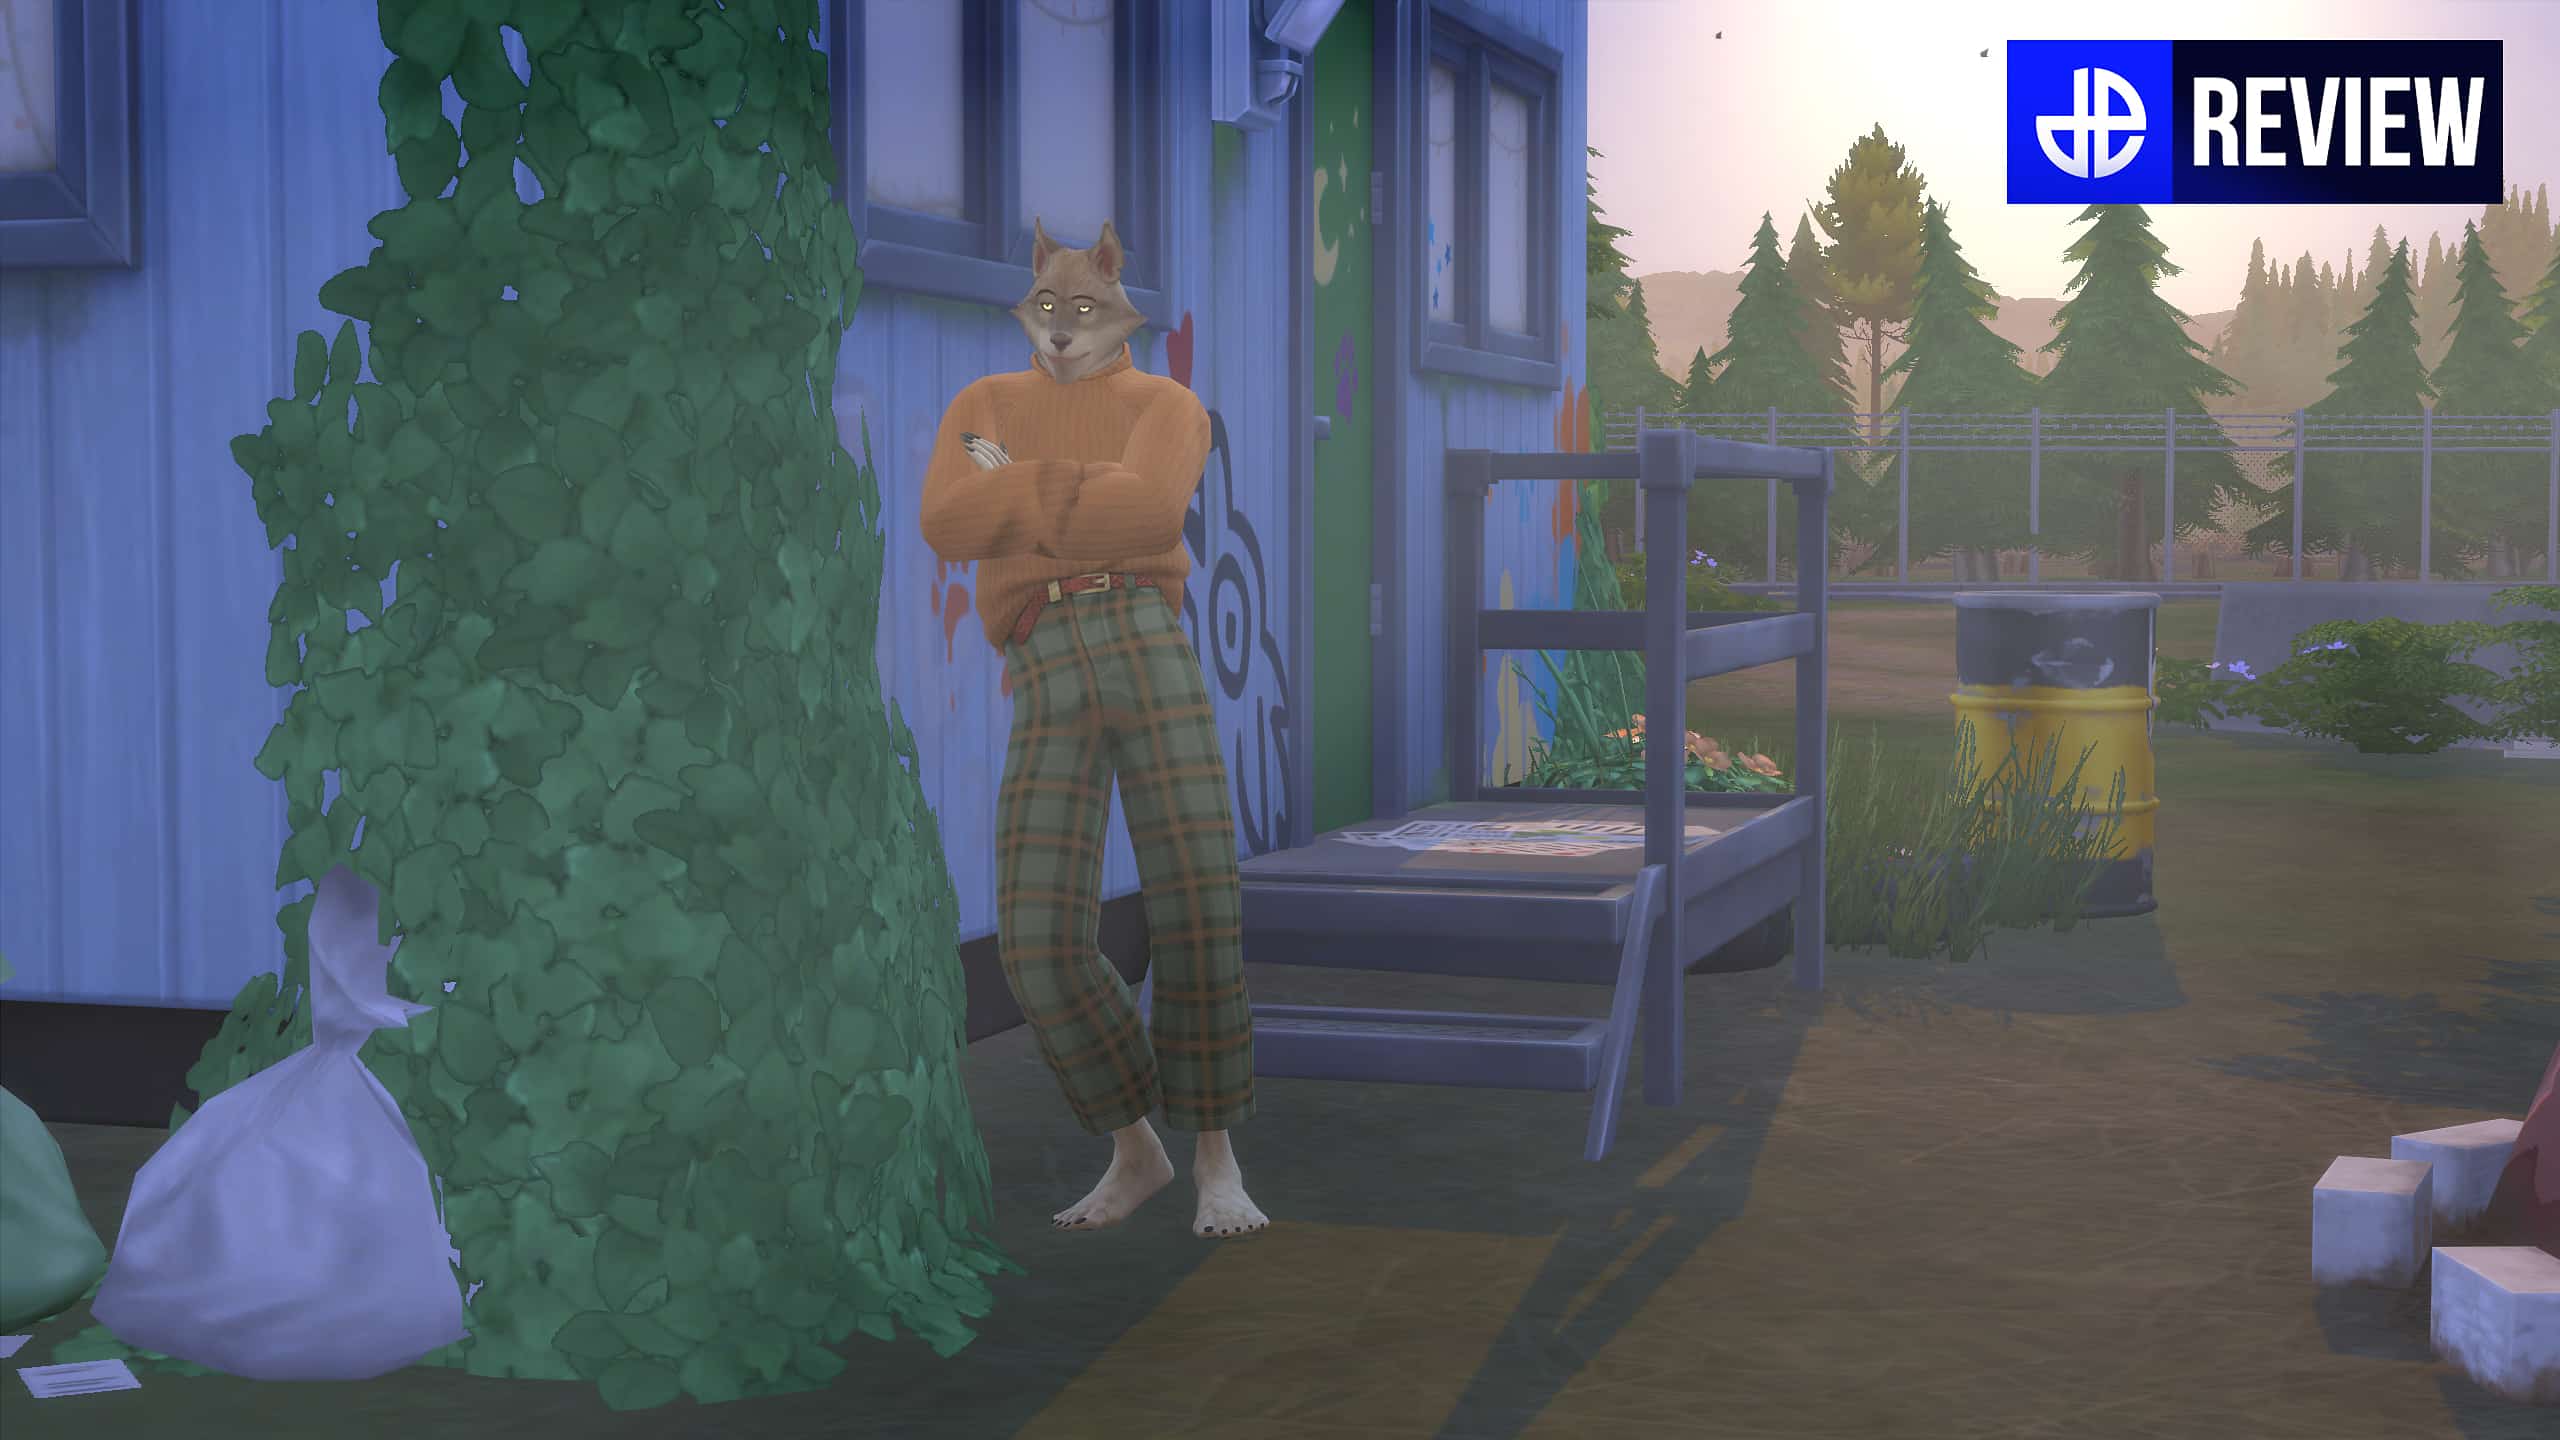 The Sims 4 Get To Work: CAS Overview